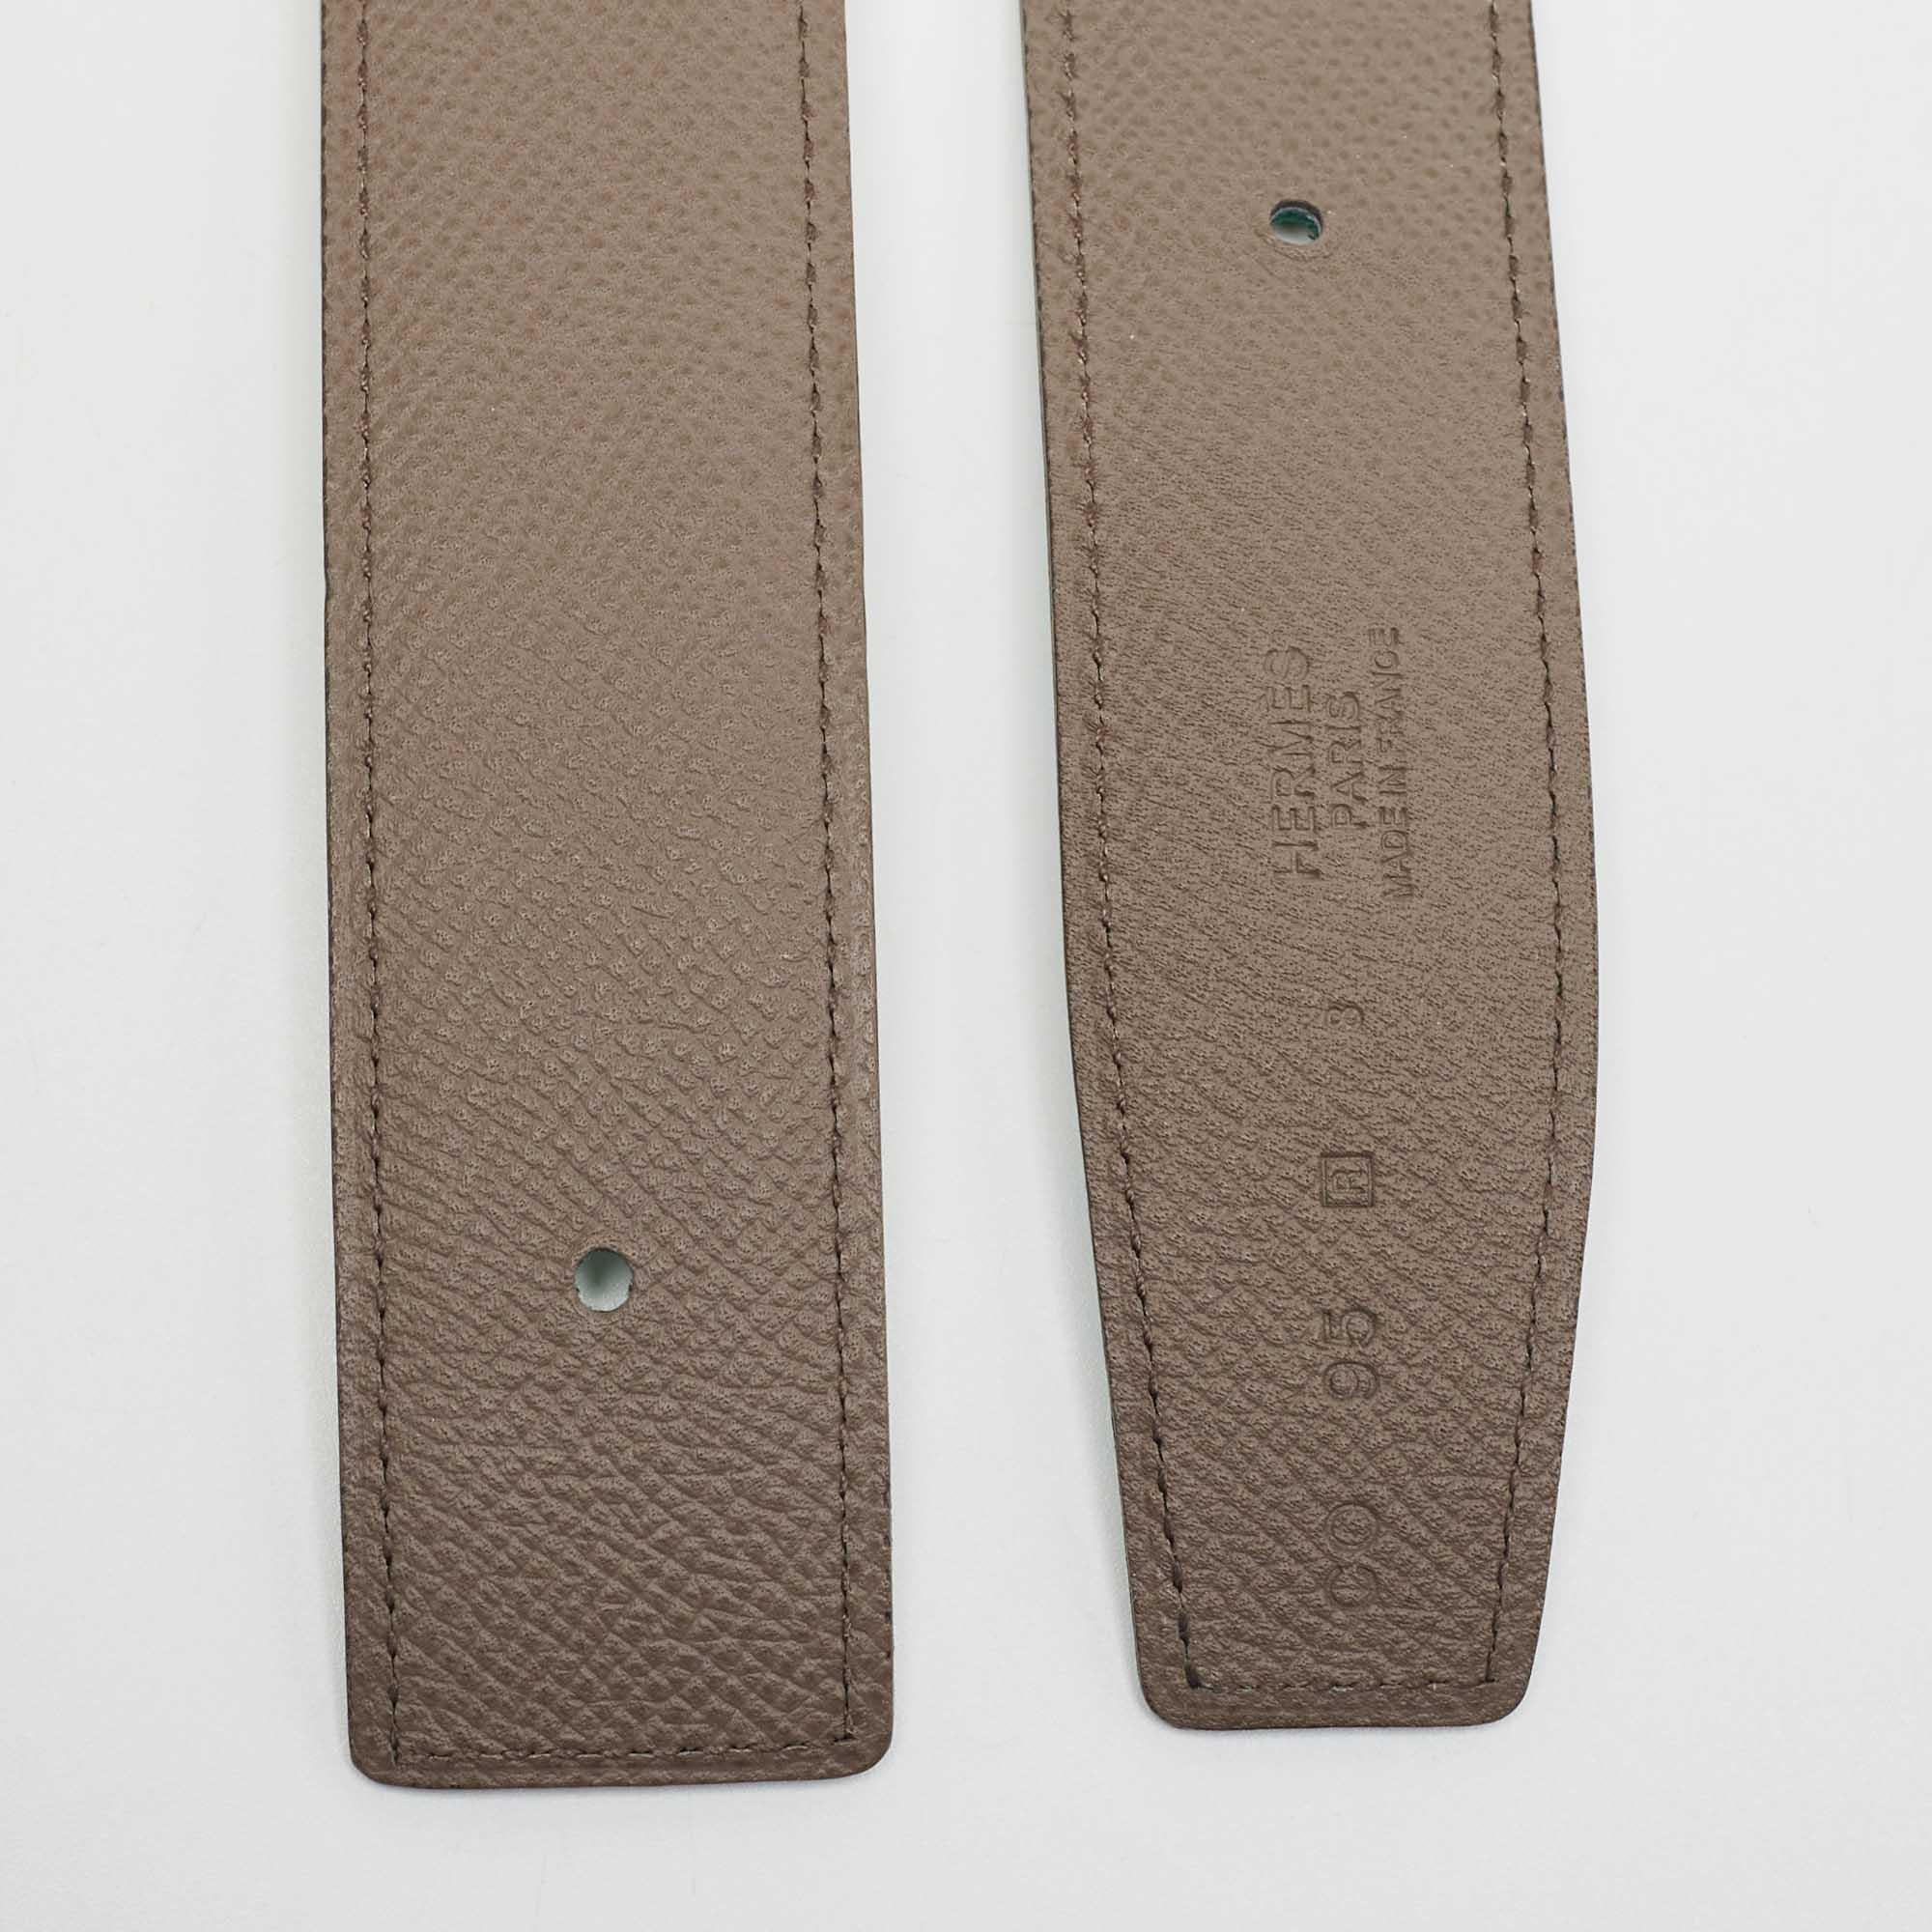 A classic add-on to your collection of belts, this Hermès belt strap has been crafted from leather in France. It has a reversible feature and it will complement any buckle shape. This sleek piece is a wardrobe essential.

